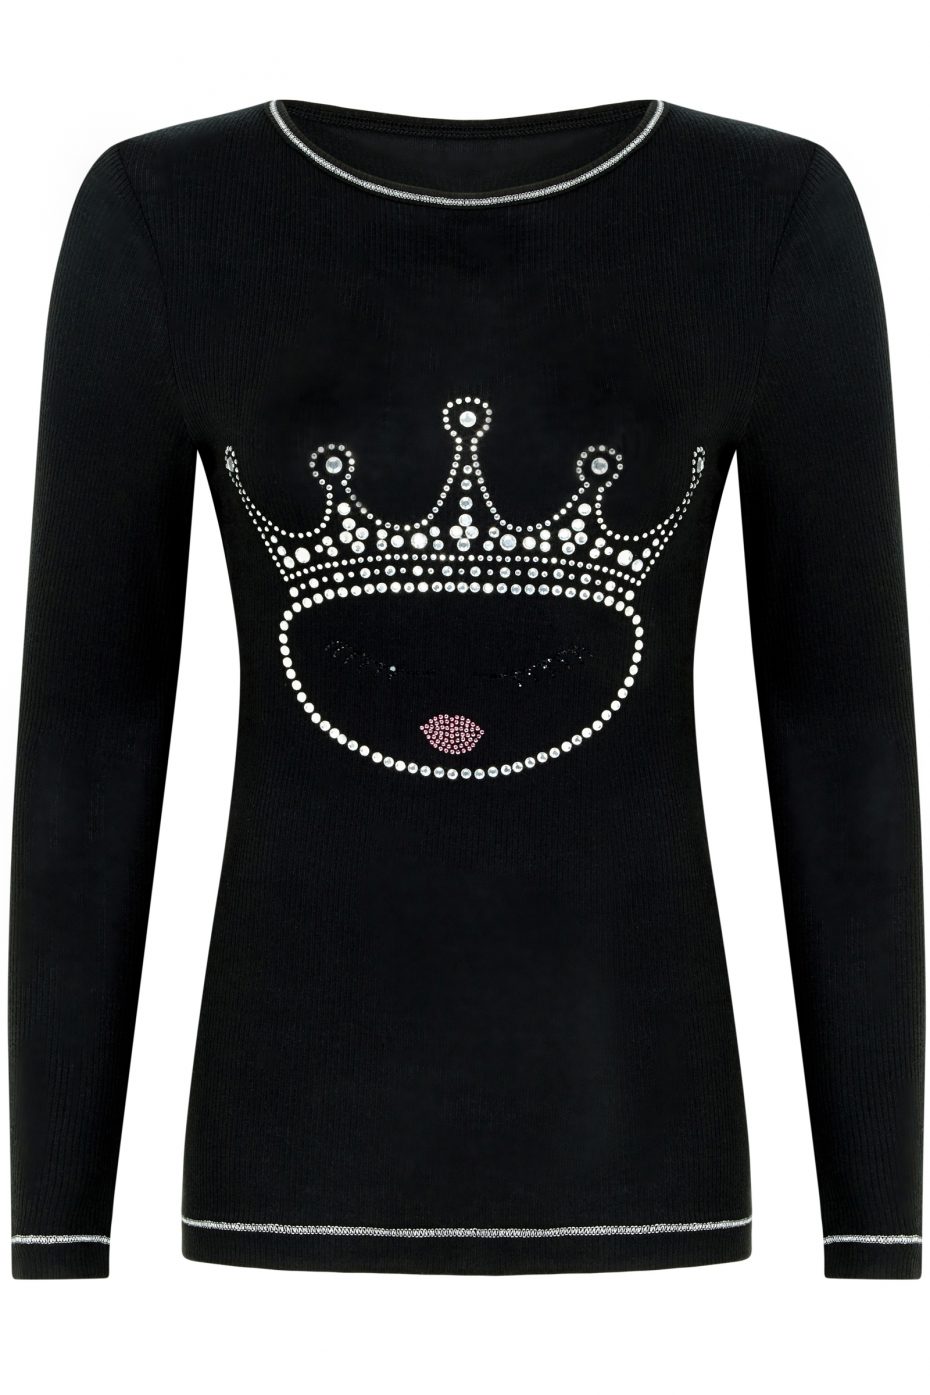 QUEEN Collection crew; Black NEW SIZES ARRIVED-415